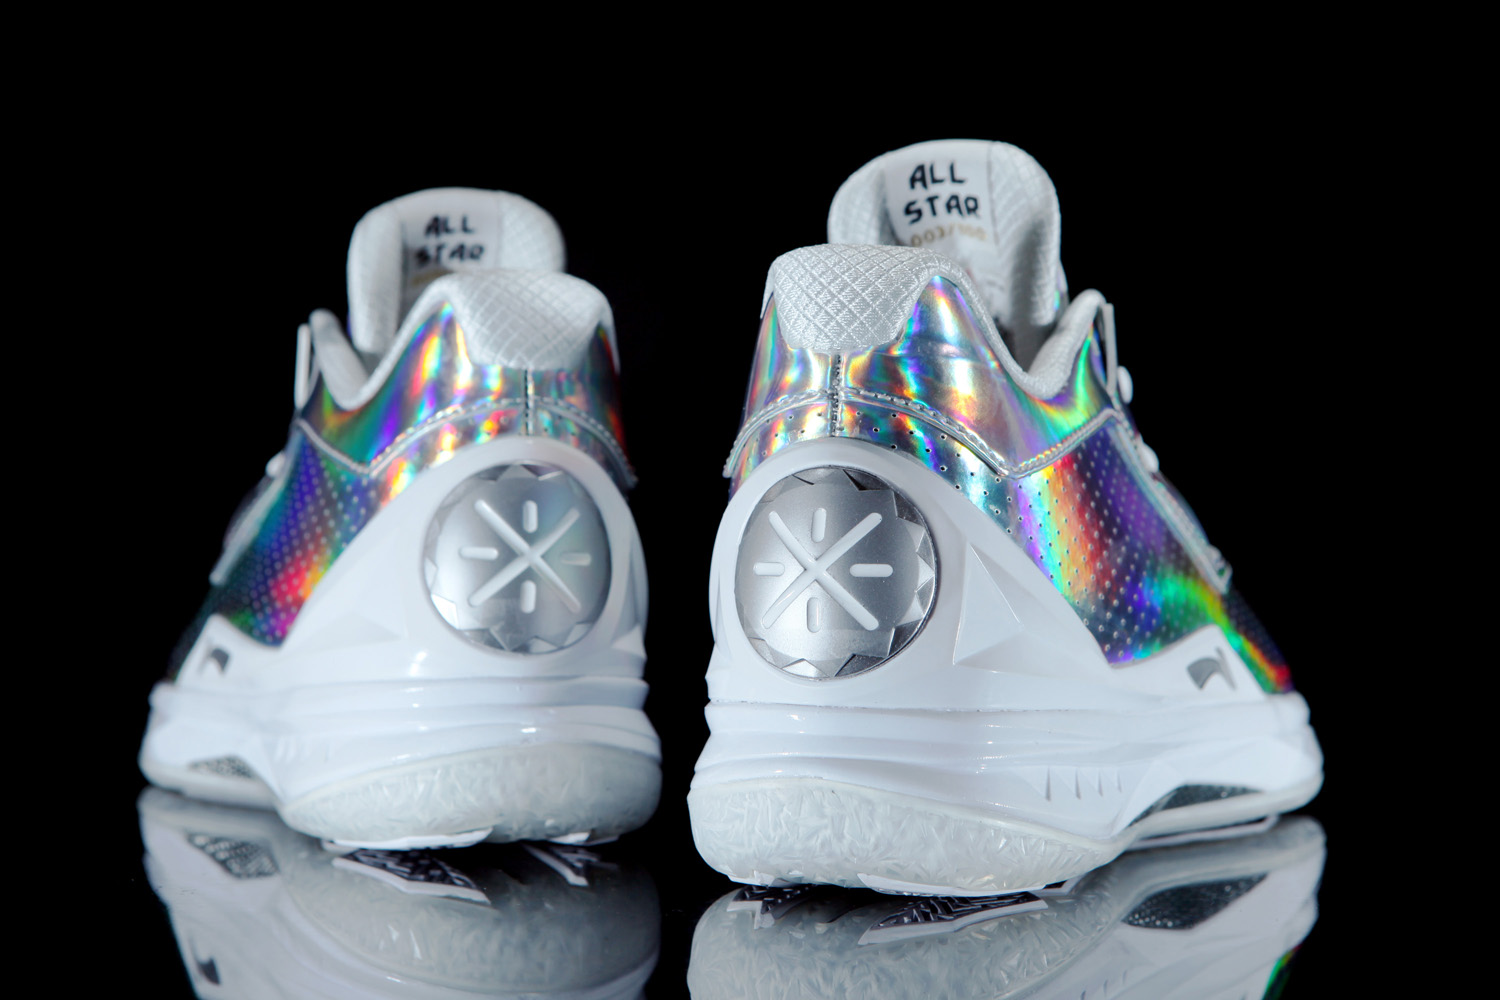 dwyane wade all star shoes